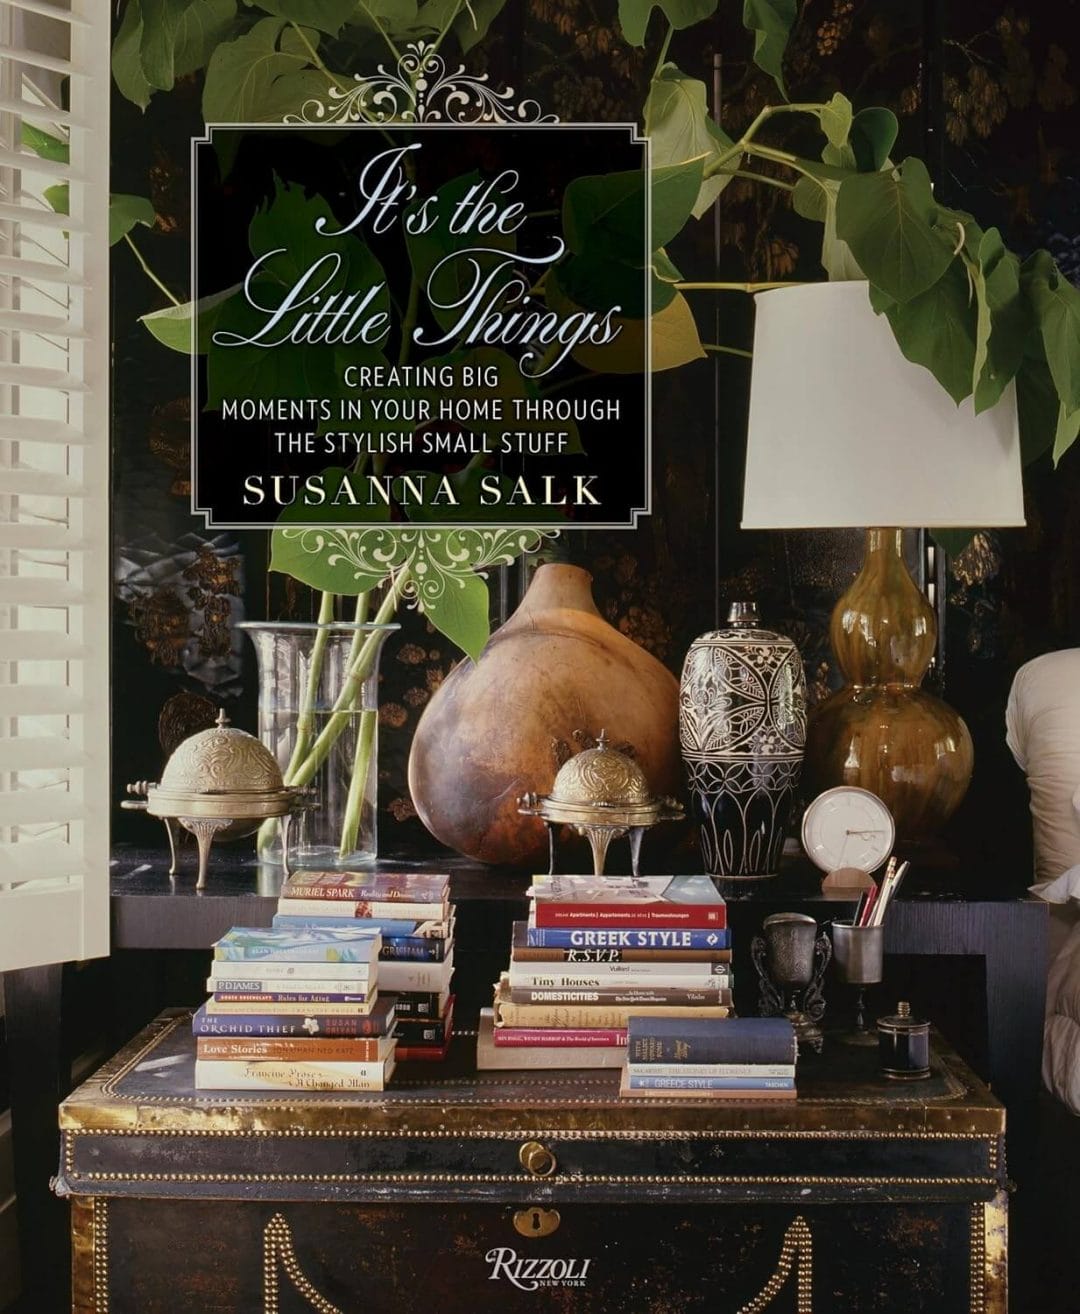 
It's the Little Things: Creating Big Moments in Your Home Through The Stylish Small Stuff Hardcover – March 15, 2016
by Susanna Salk (Author)
